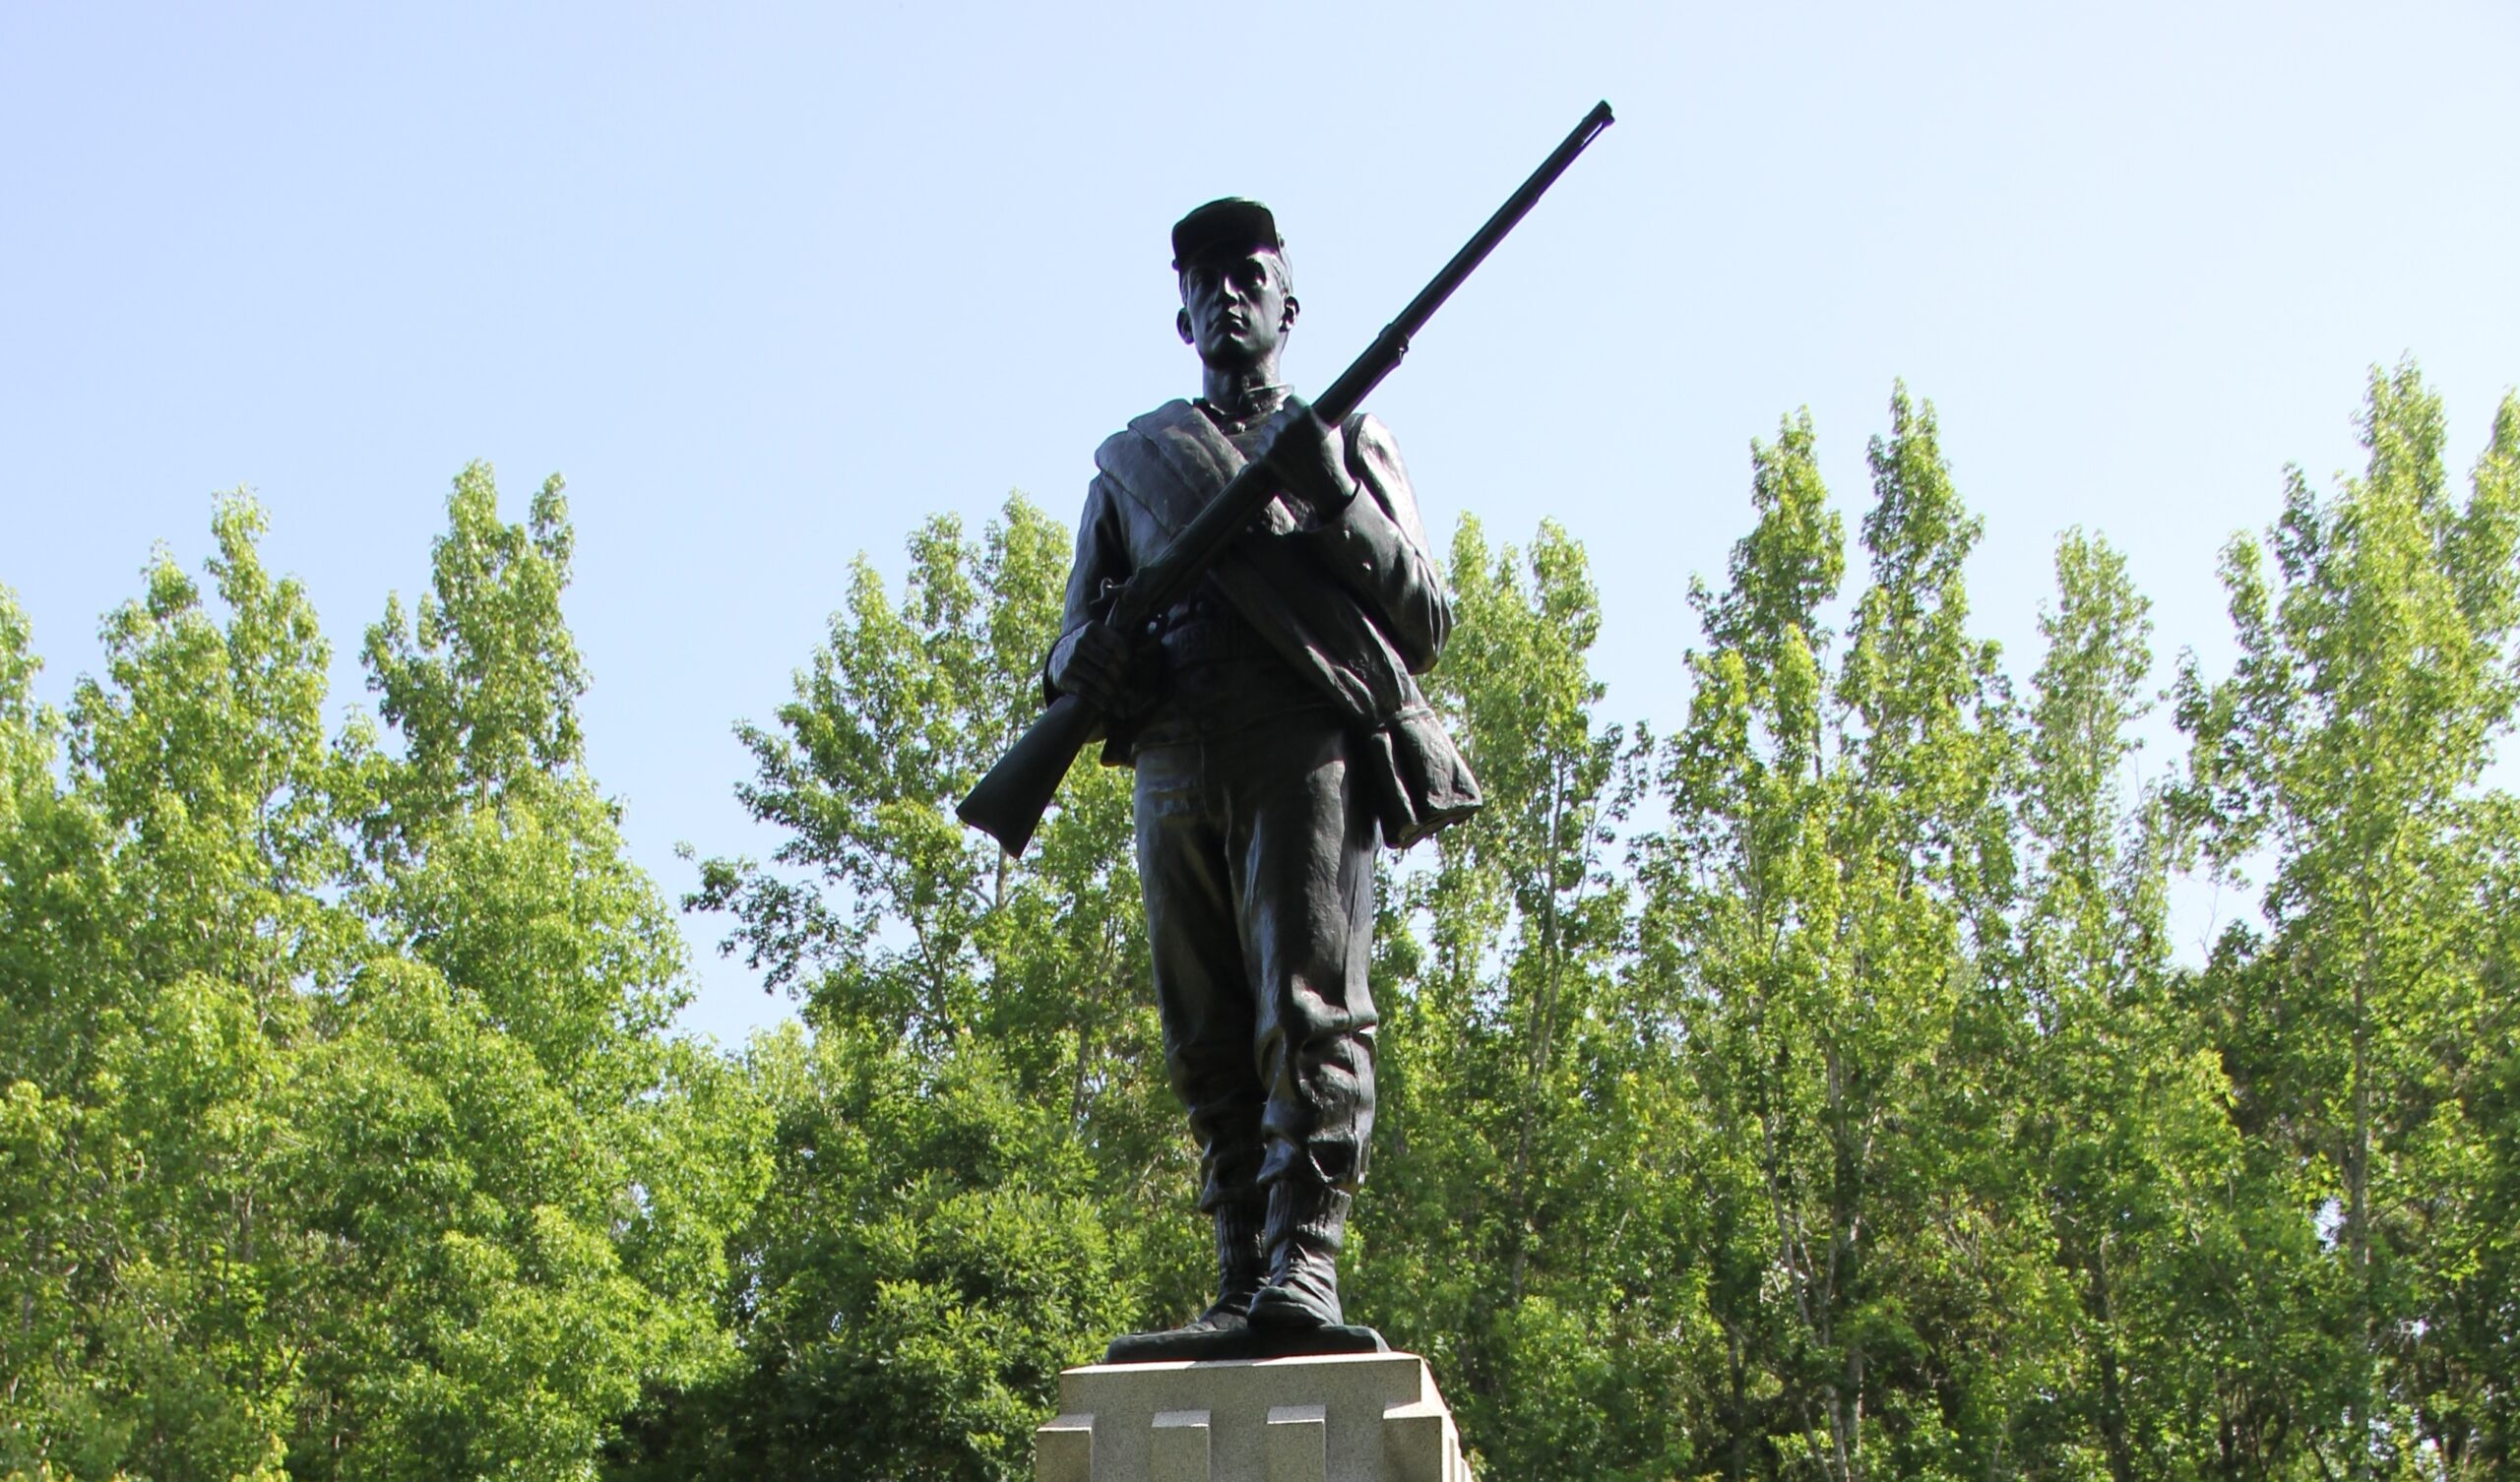 “Monuments with Meaning” Ranger Led Bicycle Tour at Shiloh